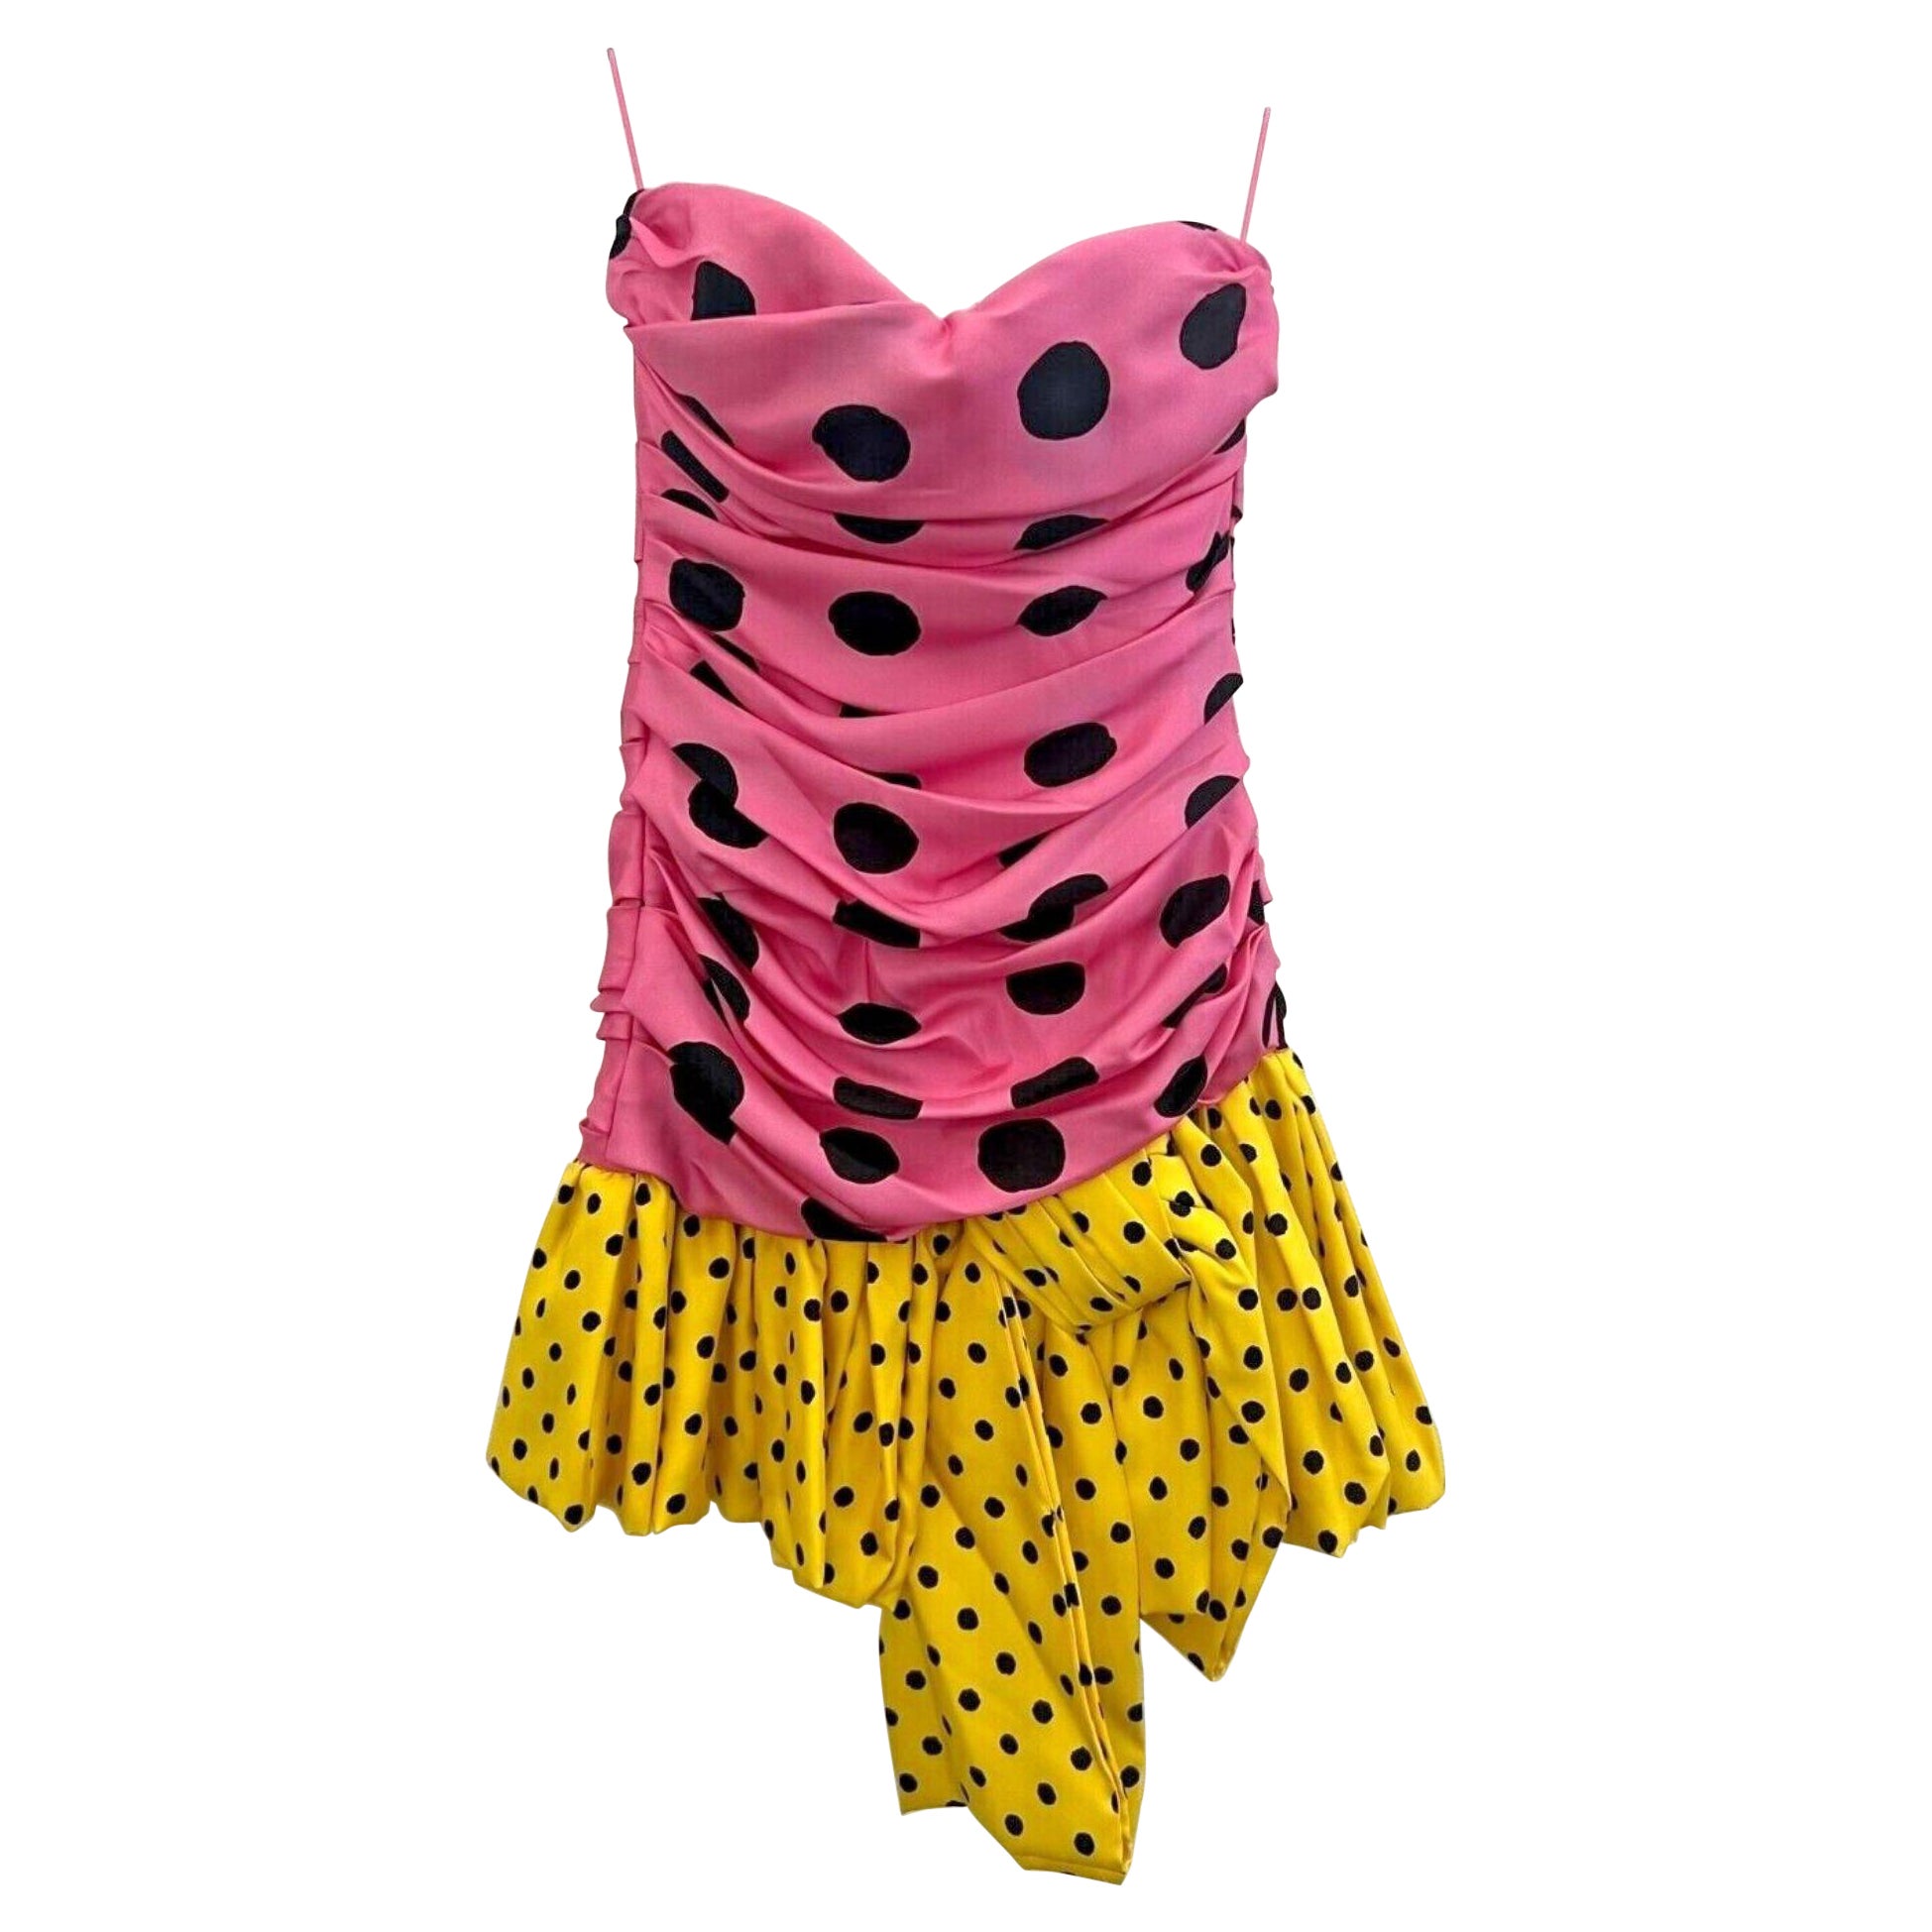 SS21 Moschino Couture Pink Yellow Strapless Polka Dot Mini Dress by Jeremy Scott For Sale